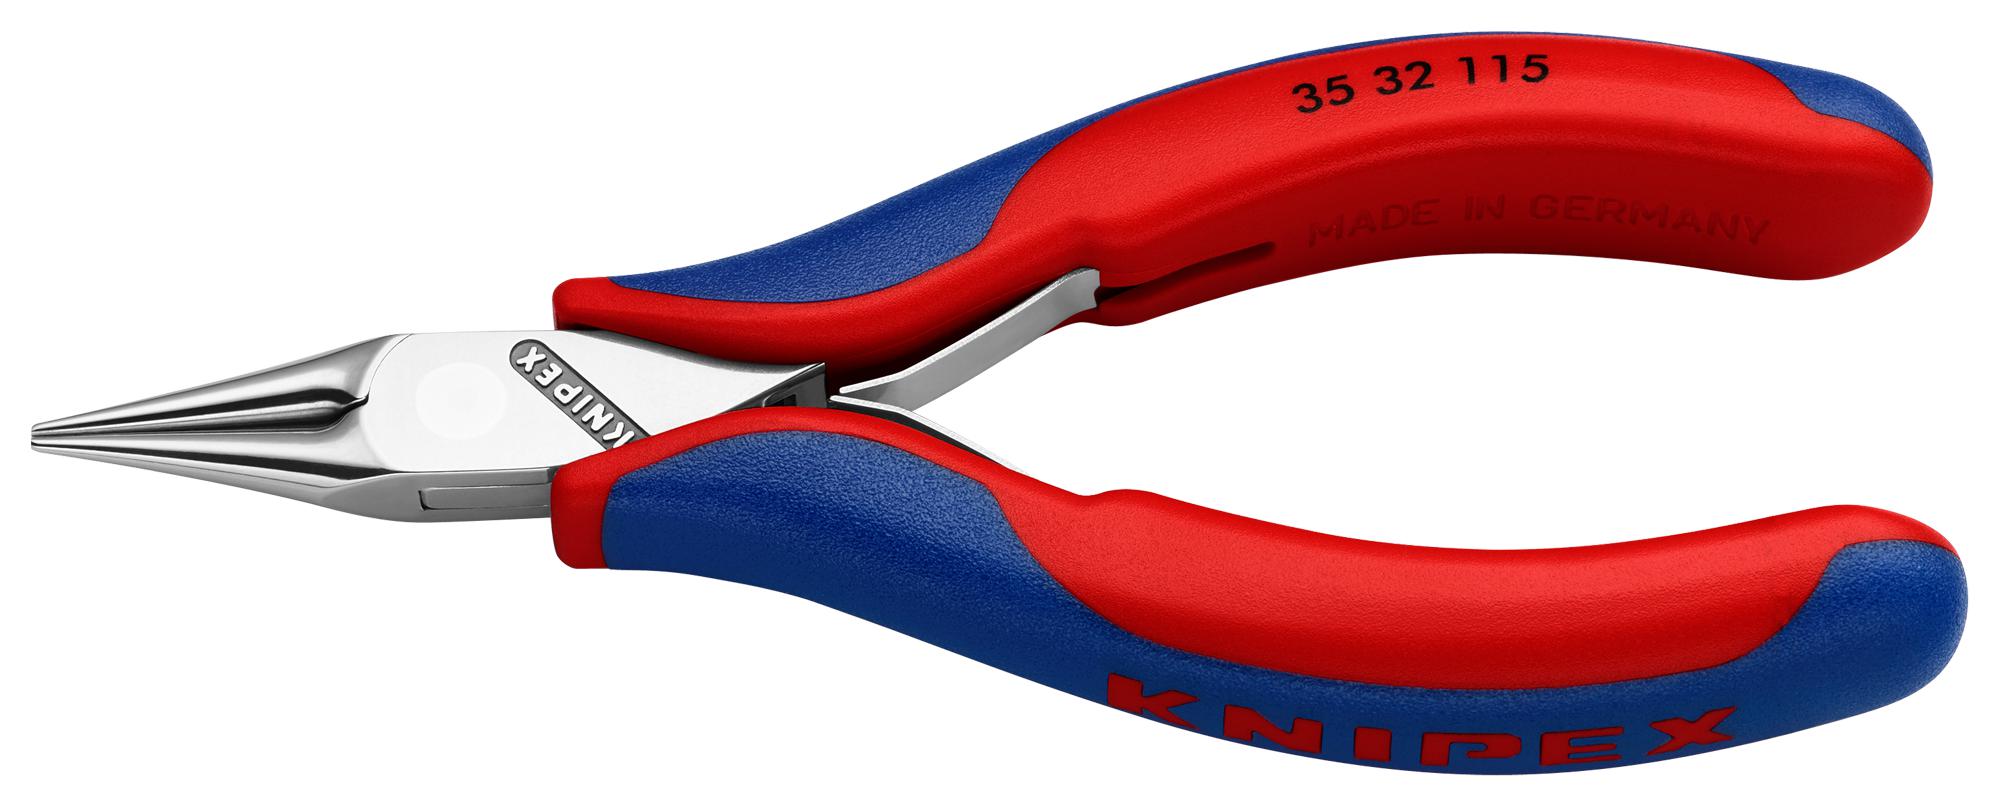 Knipex 35 32 115 Relay Adjusting Pliers